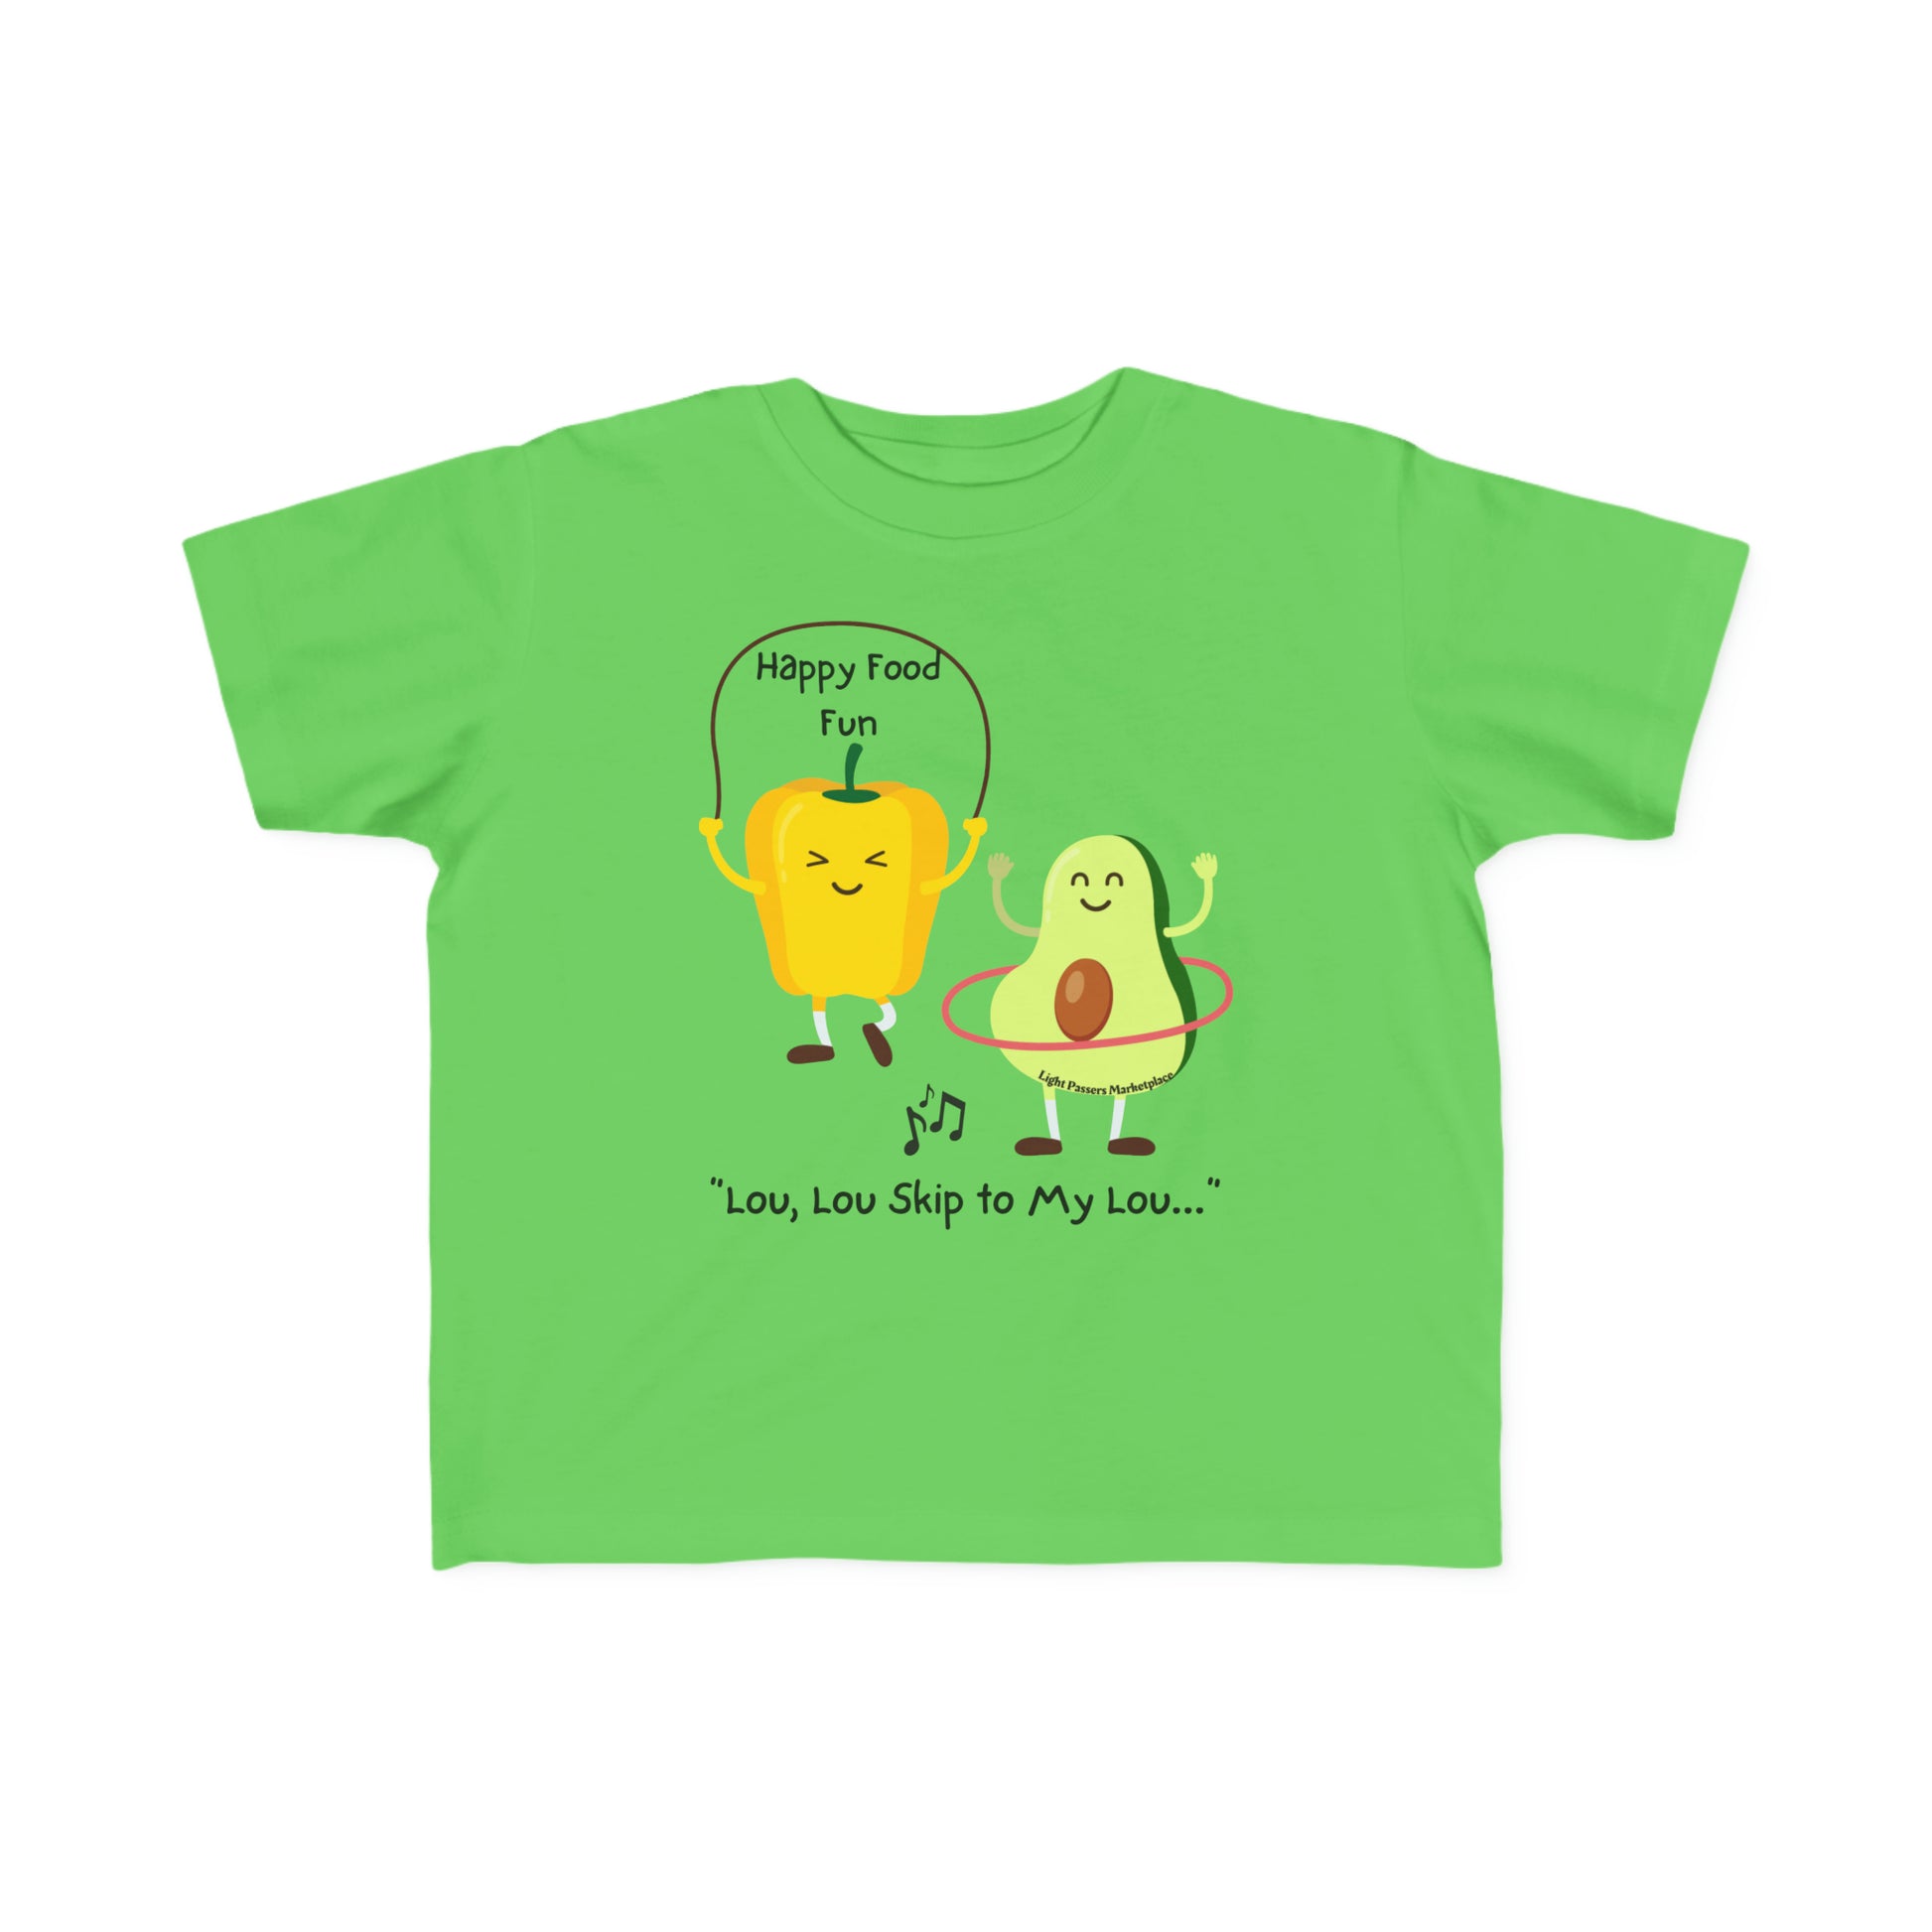 A Skip To My Lou Toddler T-shirt featuring cartoon vegetables and characters, perfect for sensitive skin. Made of 100% combed, ring-spun cotton with a durable print. Classic fit, light fabric.